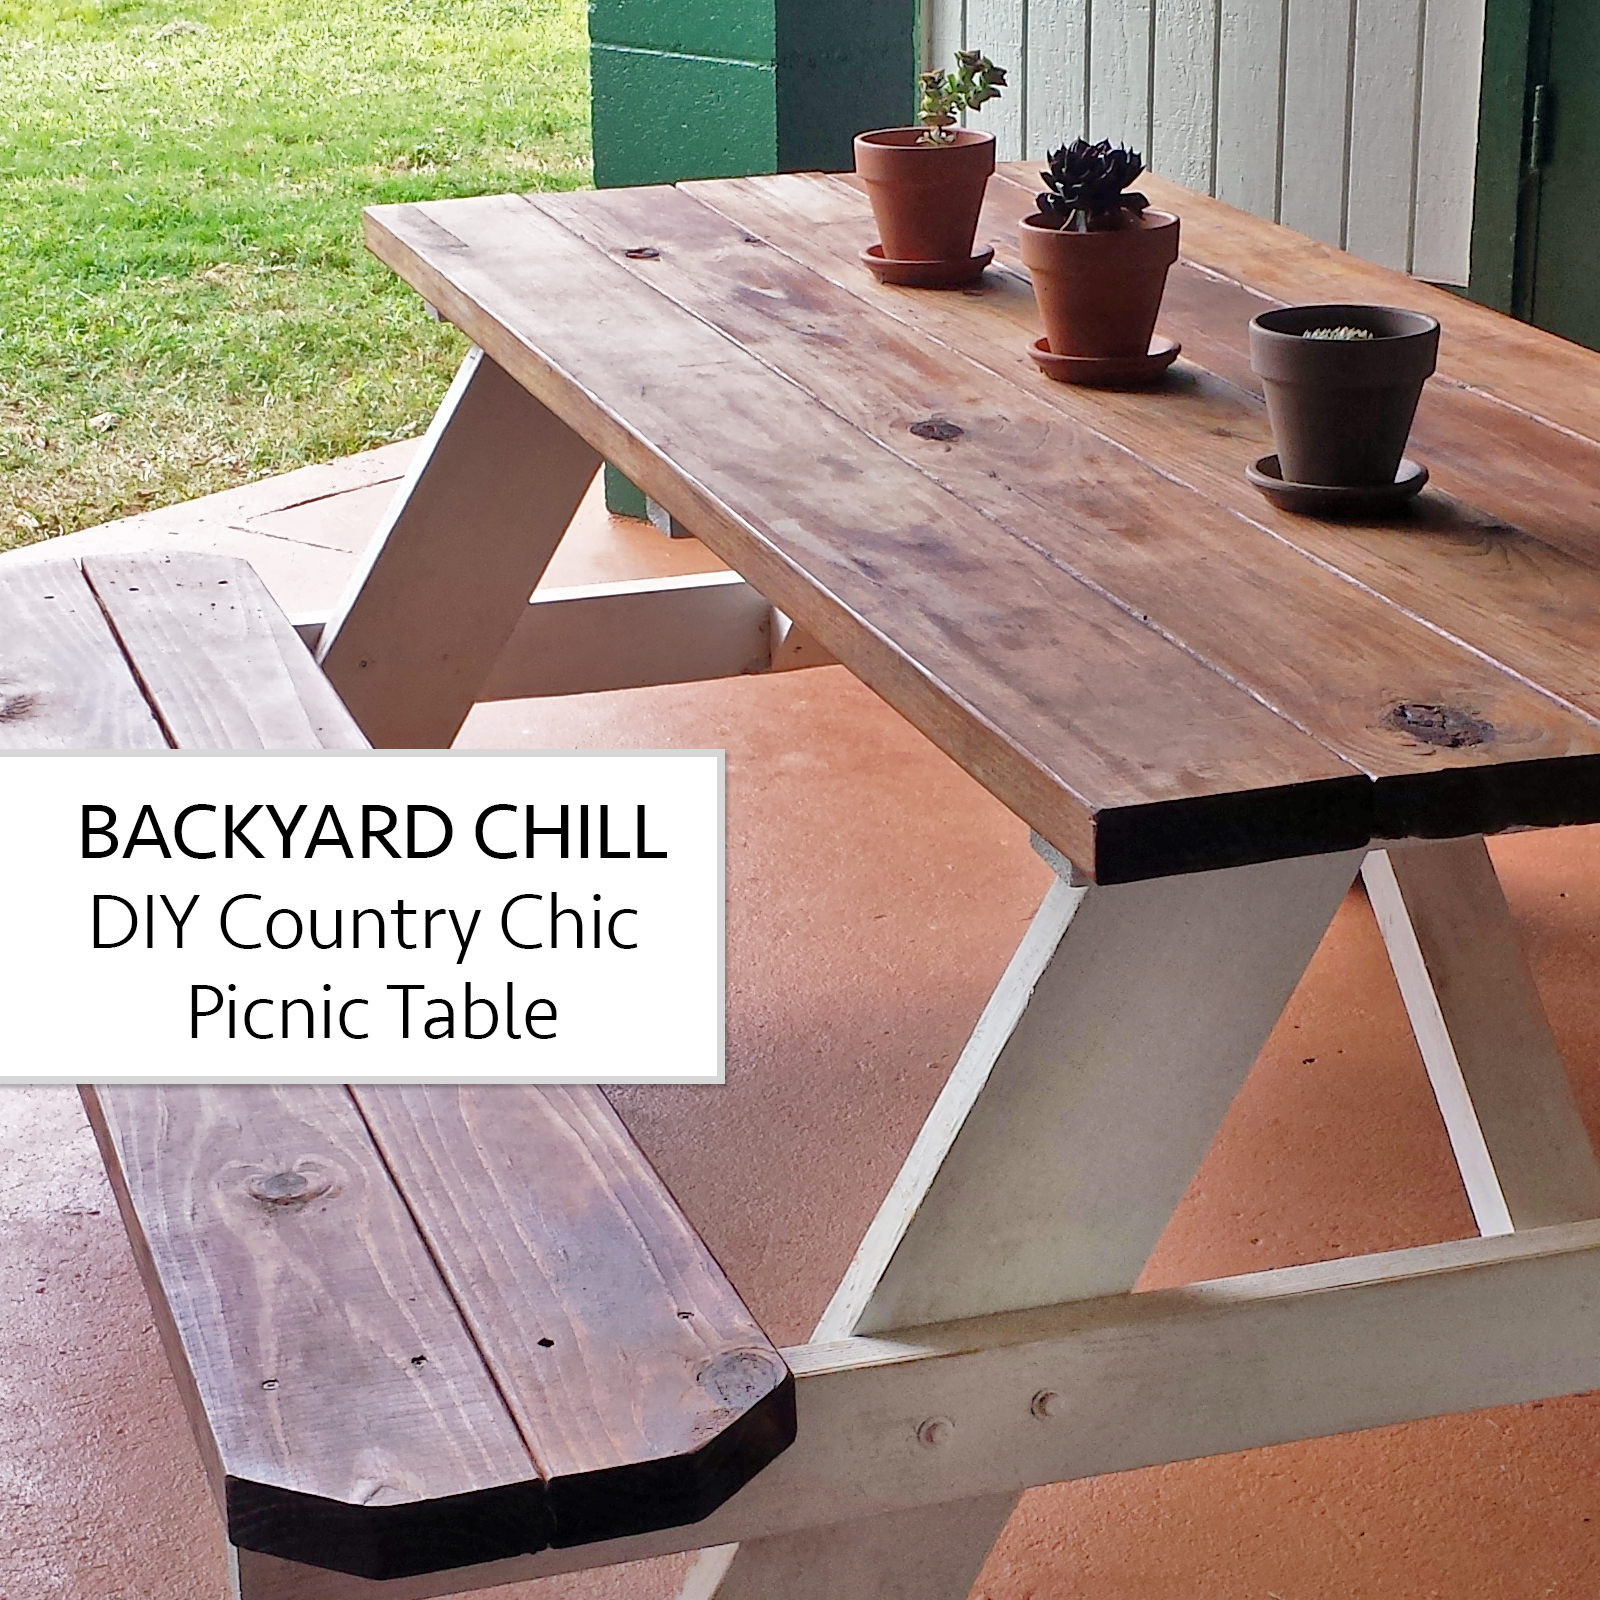 country chic picnic table DIY